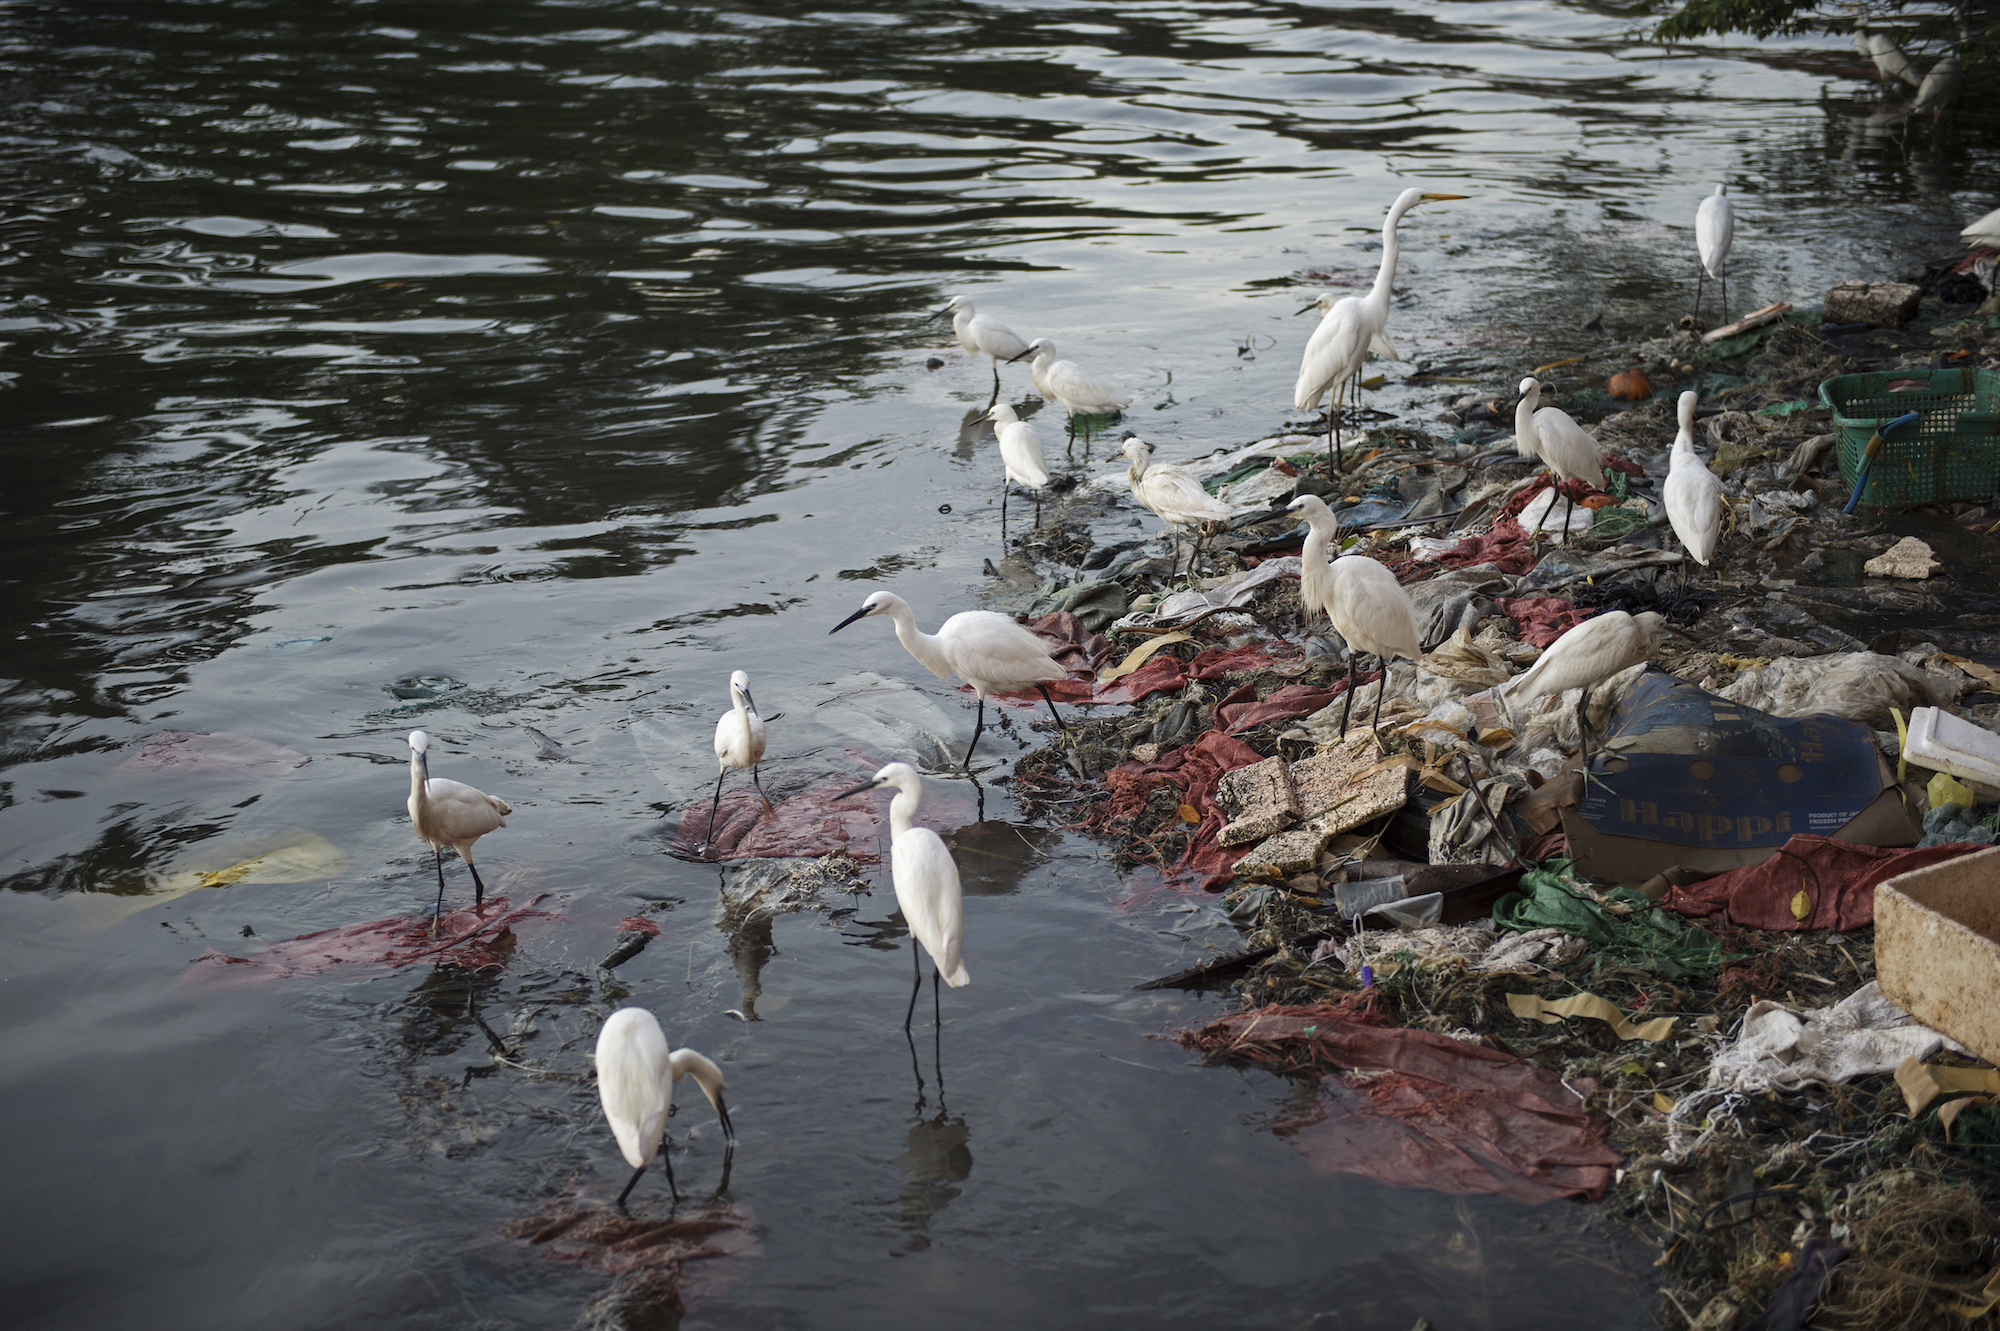 effects of water pollution on plants and animals